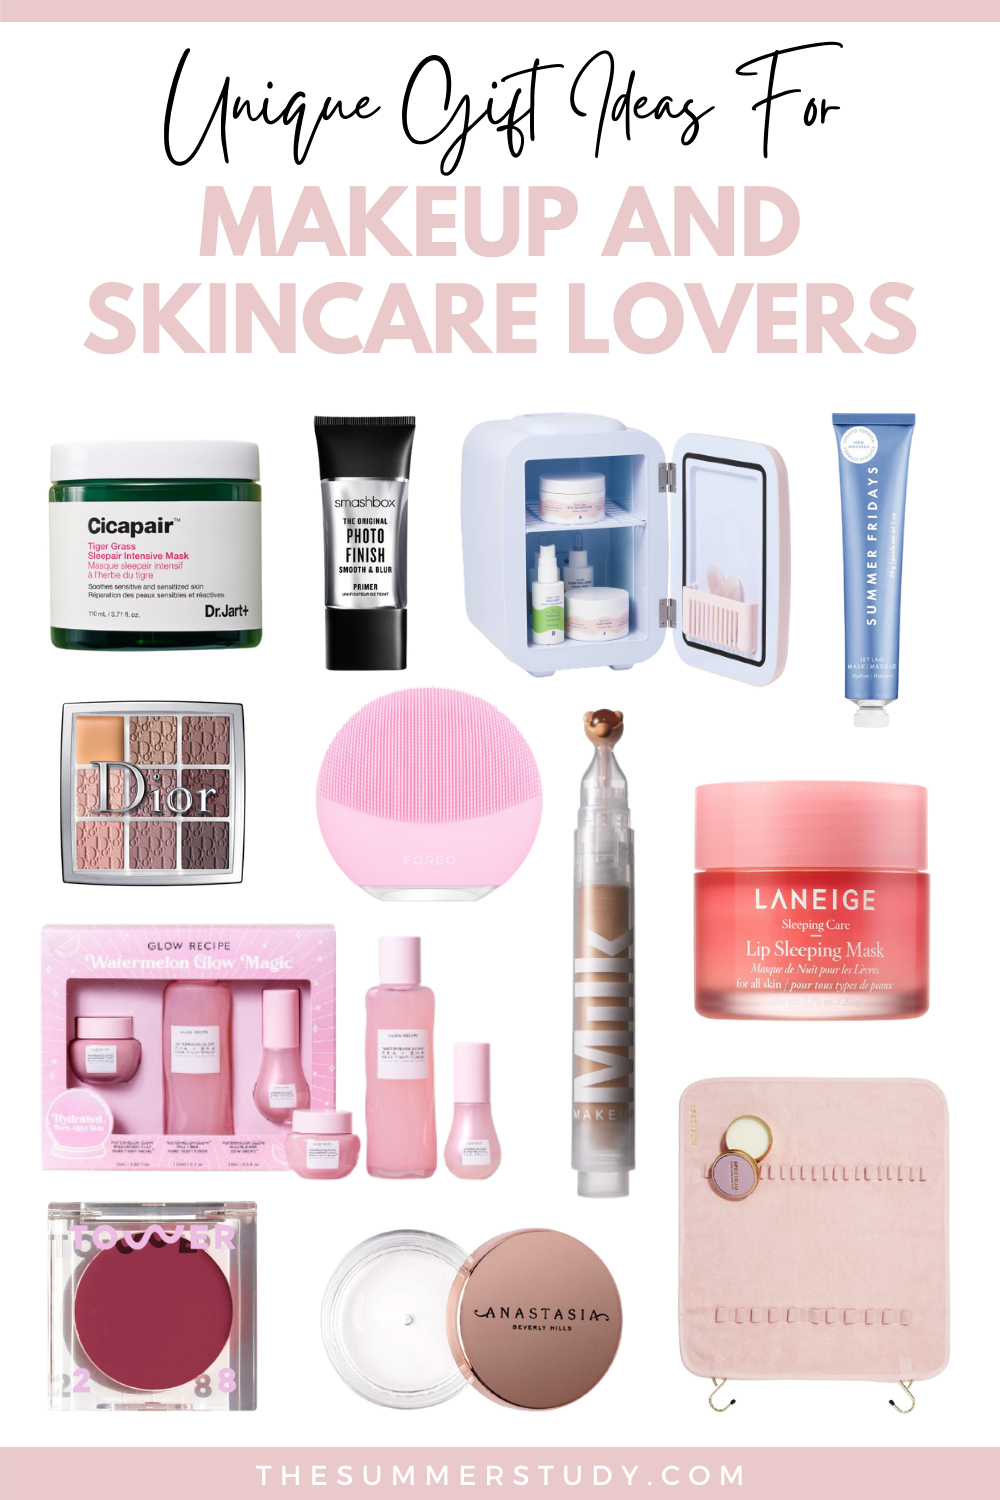 Stoop privat Blodig 25 Unique Gift Ideas For Makeup And Skincare Lovers - The Summer Study